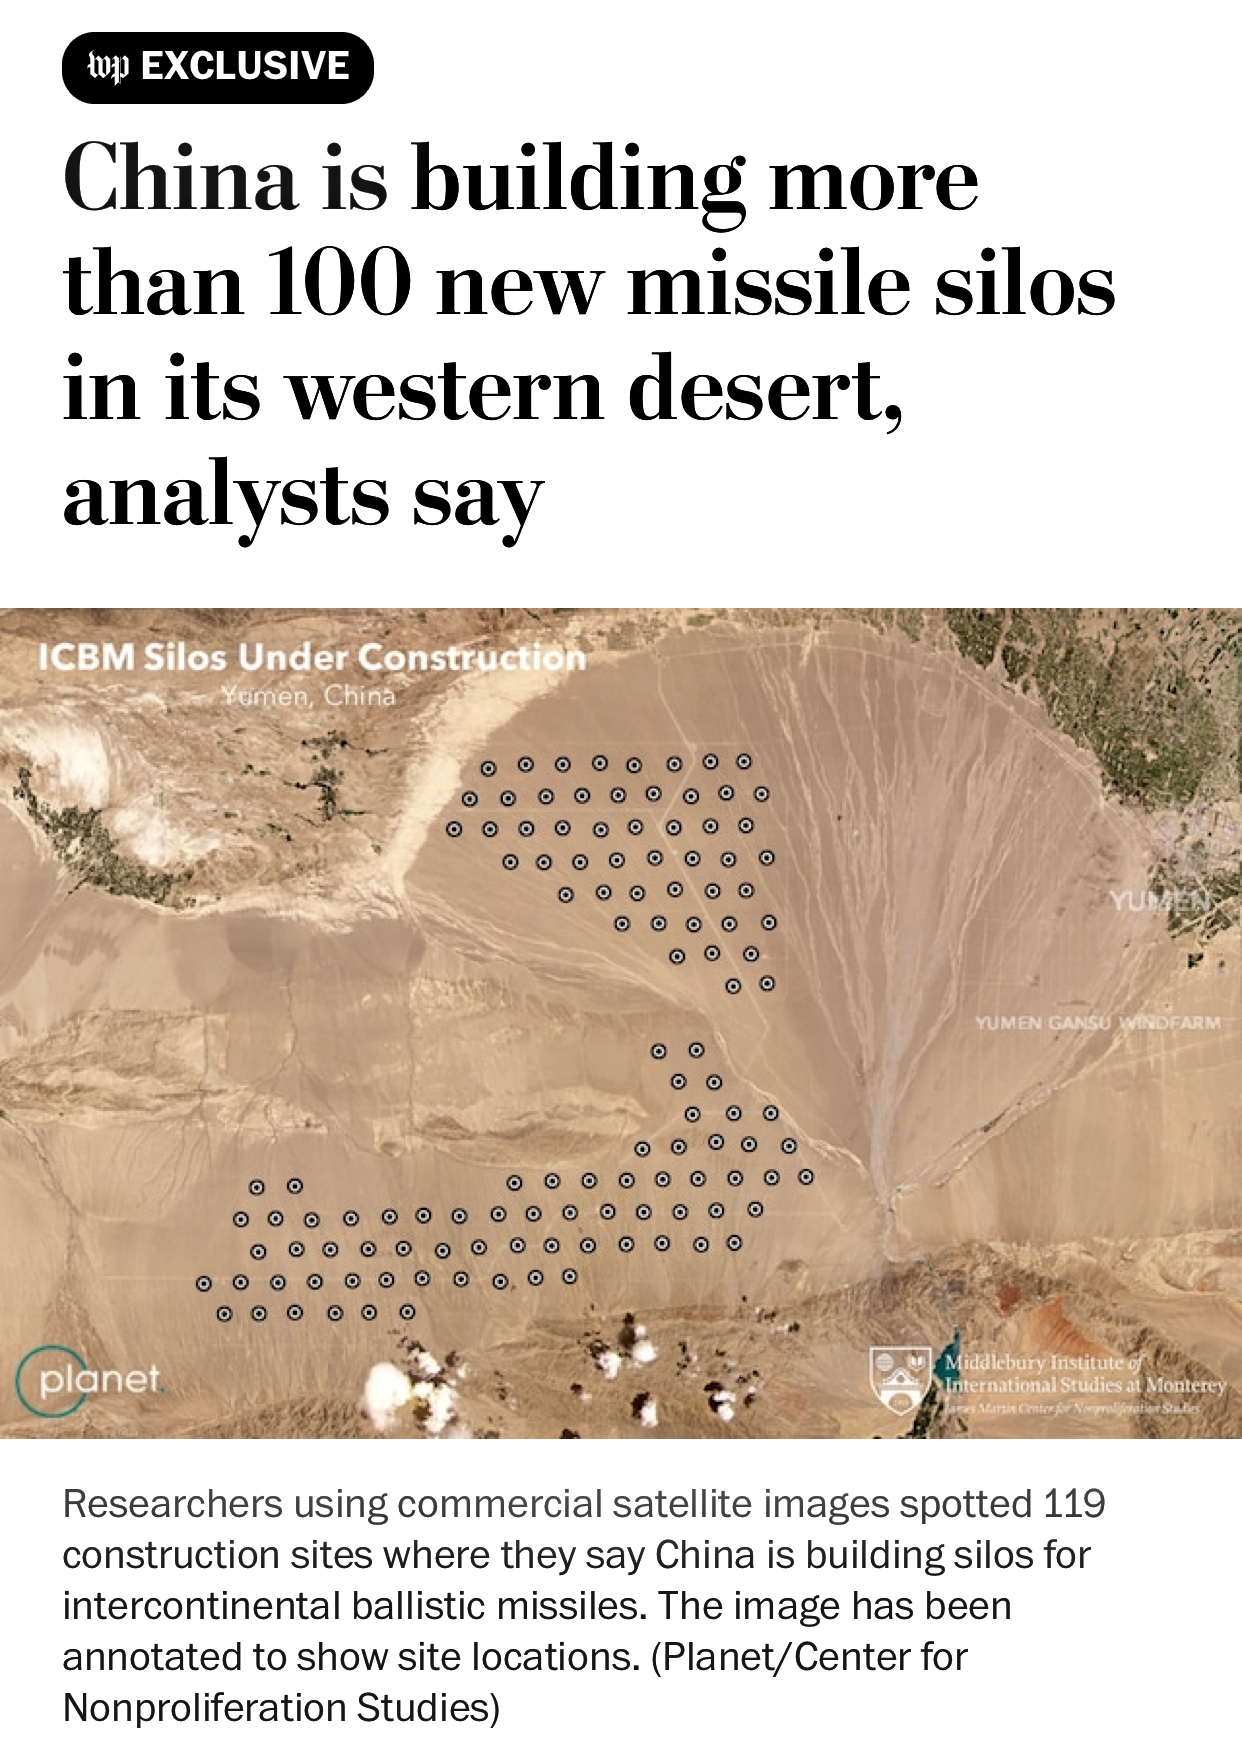 🚨🚨🚨China is building more than 100 new missile silos in its western desert, analysts say